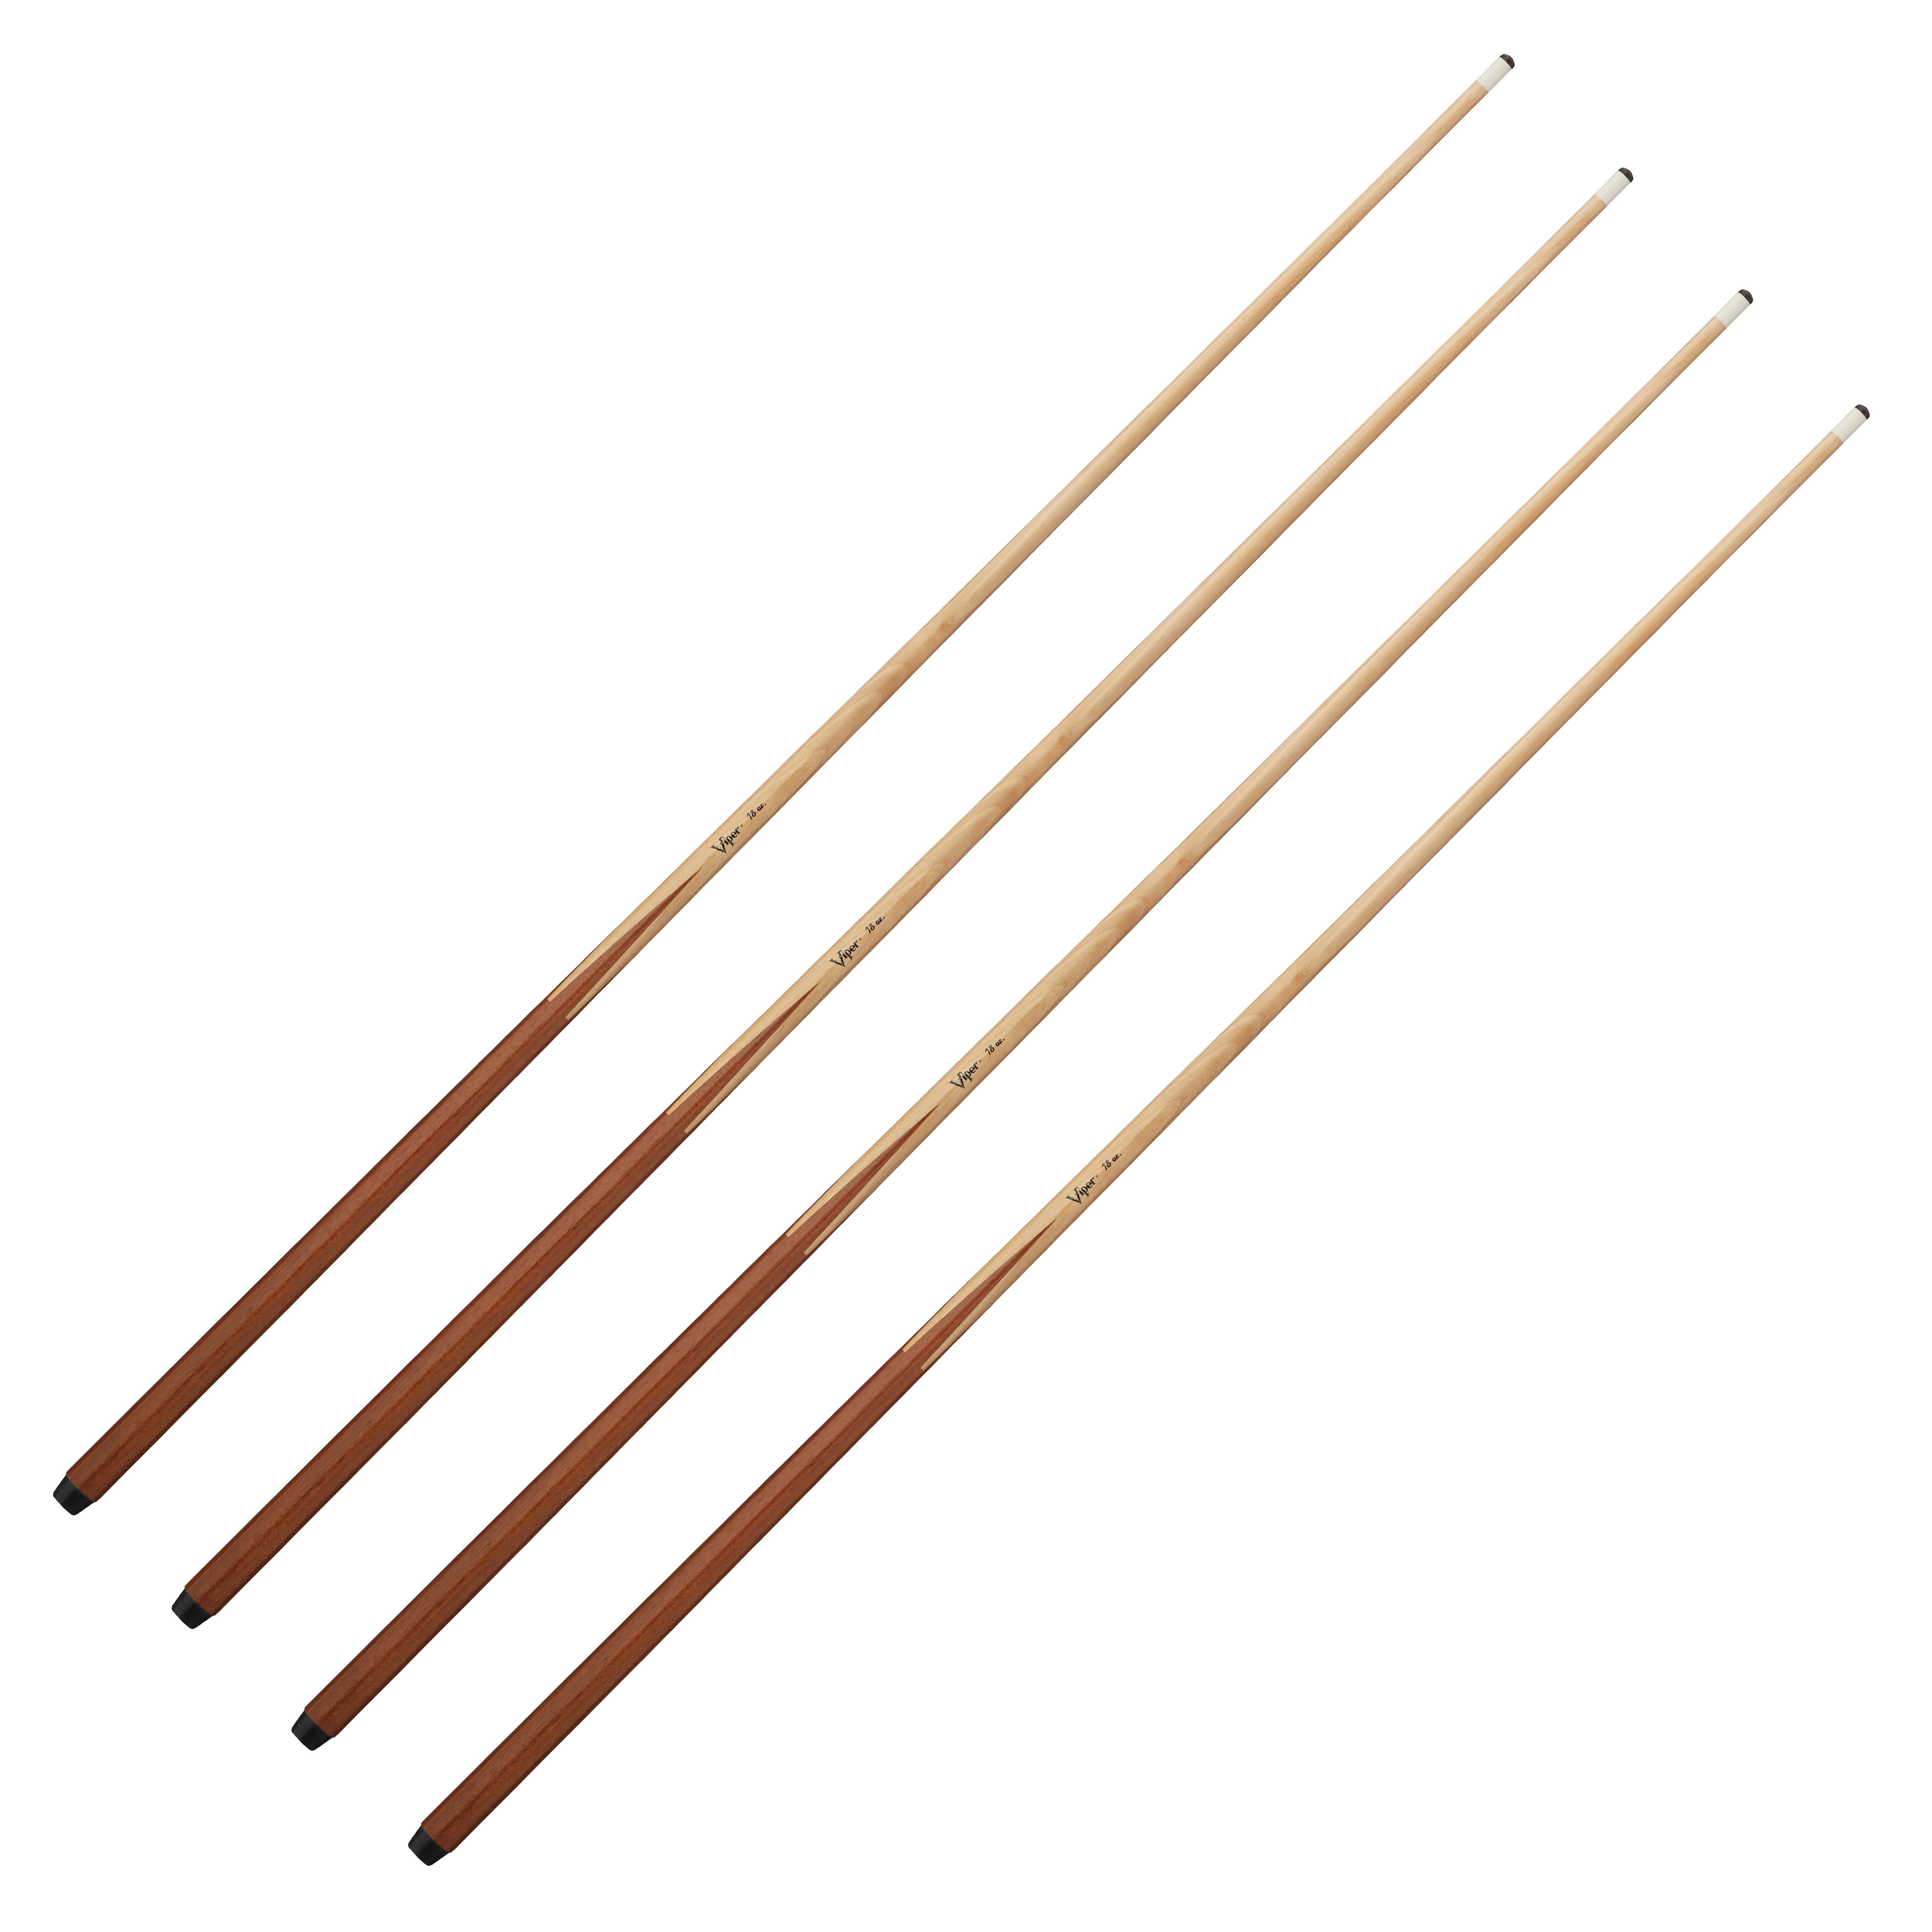 3 Brand New One Piece Pool Cues sticks Bar House Maple 4-Prong inlay 57"inch 